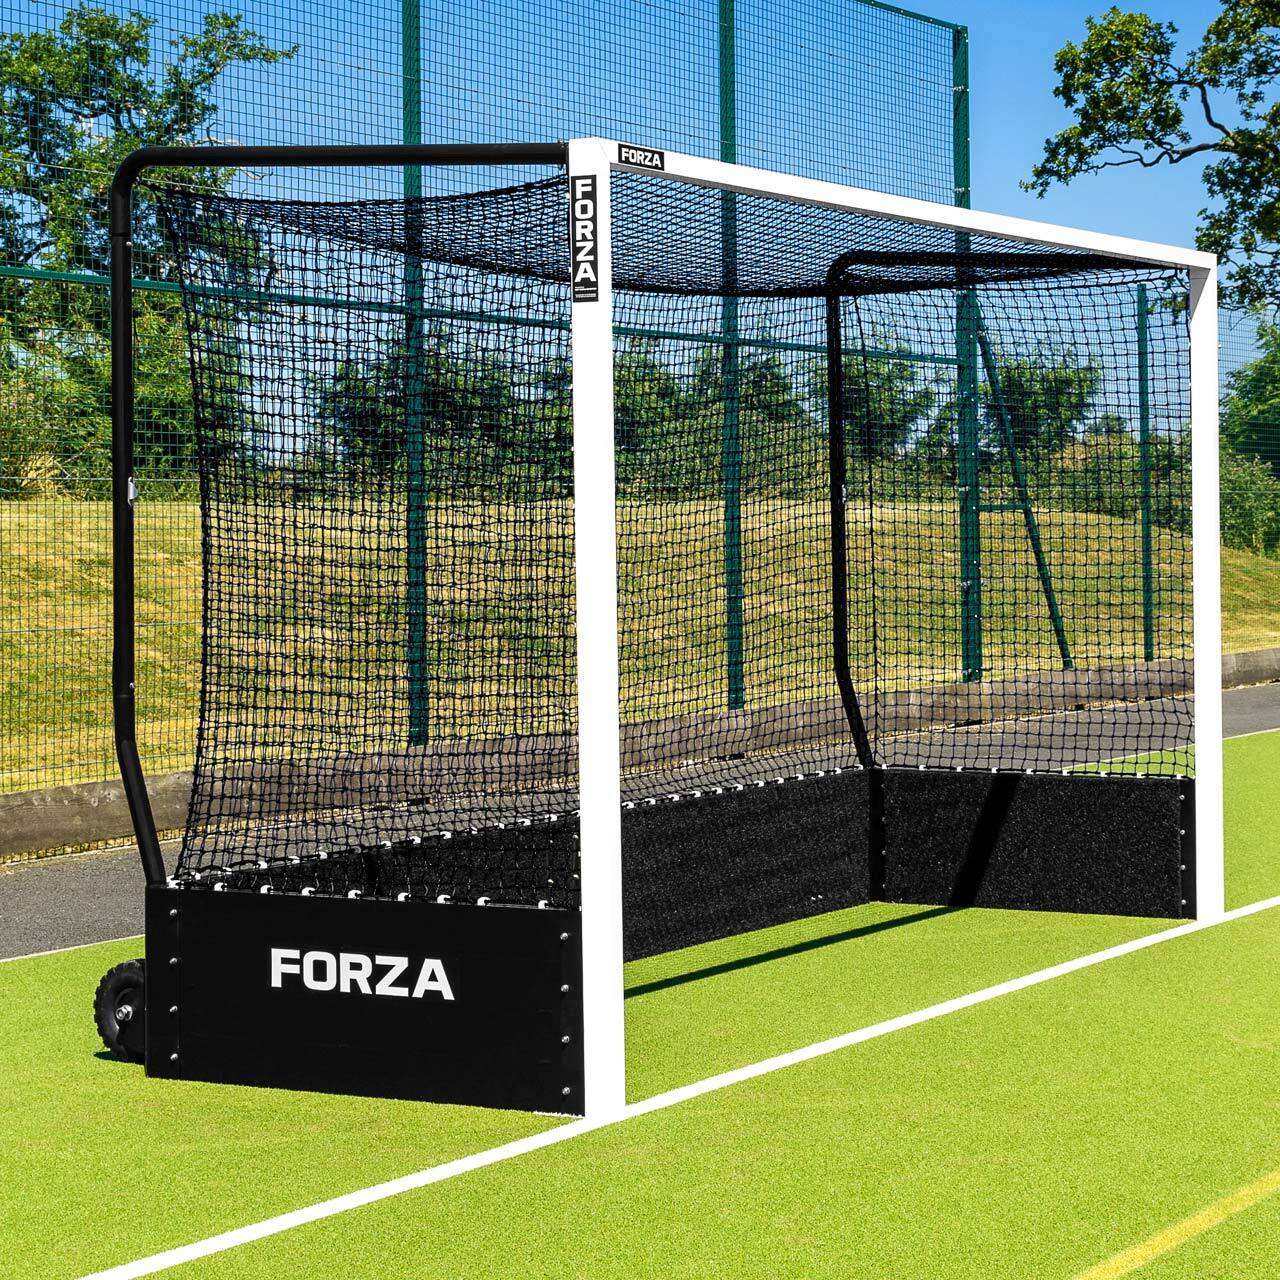 FORZA REPLACEMENT FIH HOCKEY GOAL NETS [Colour: White]